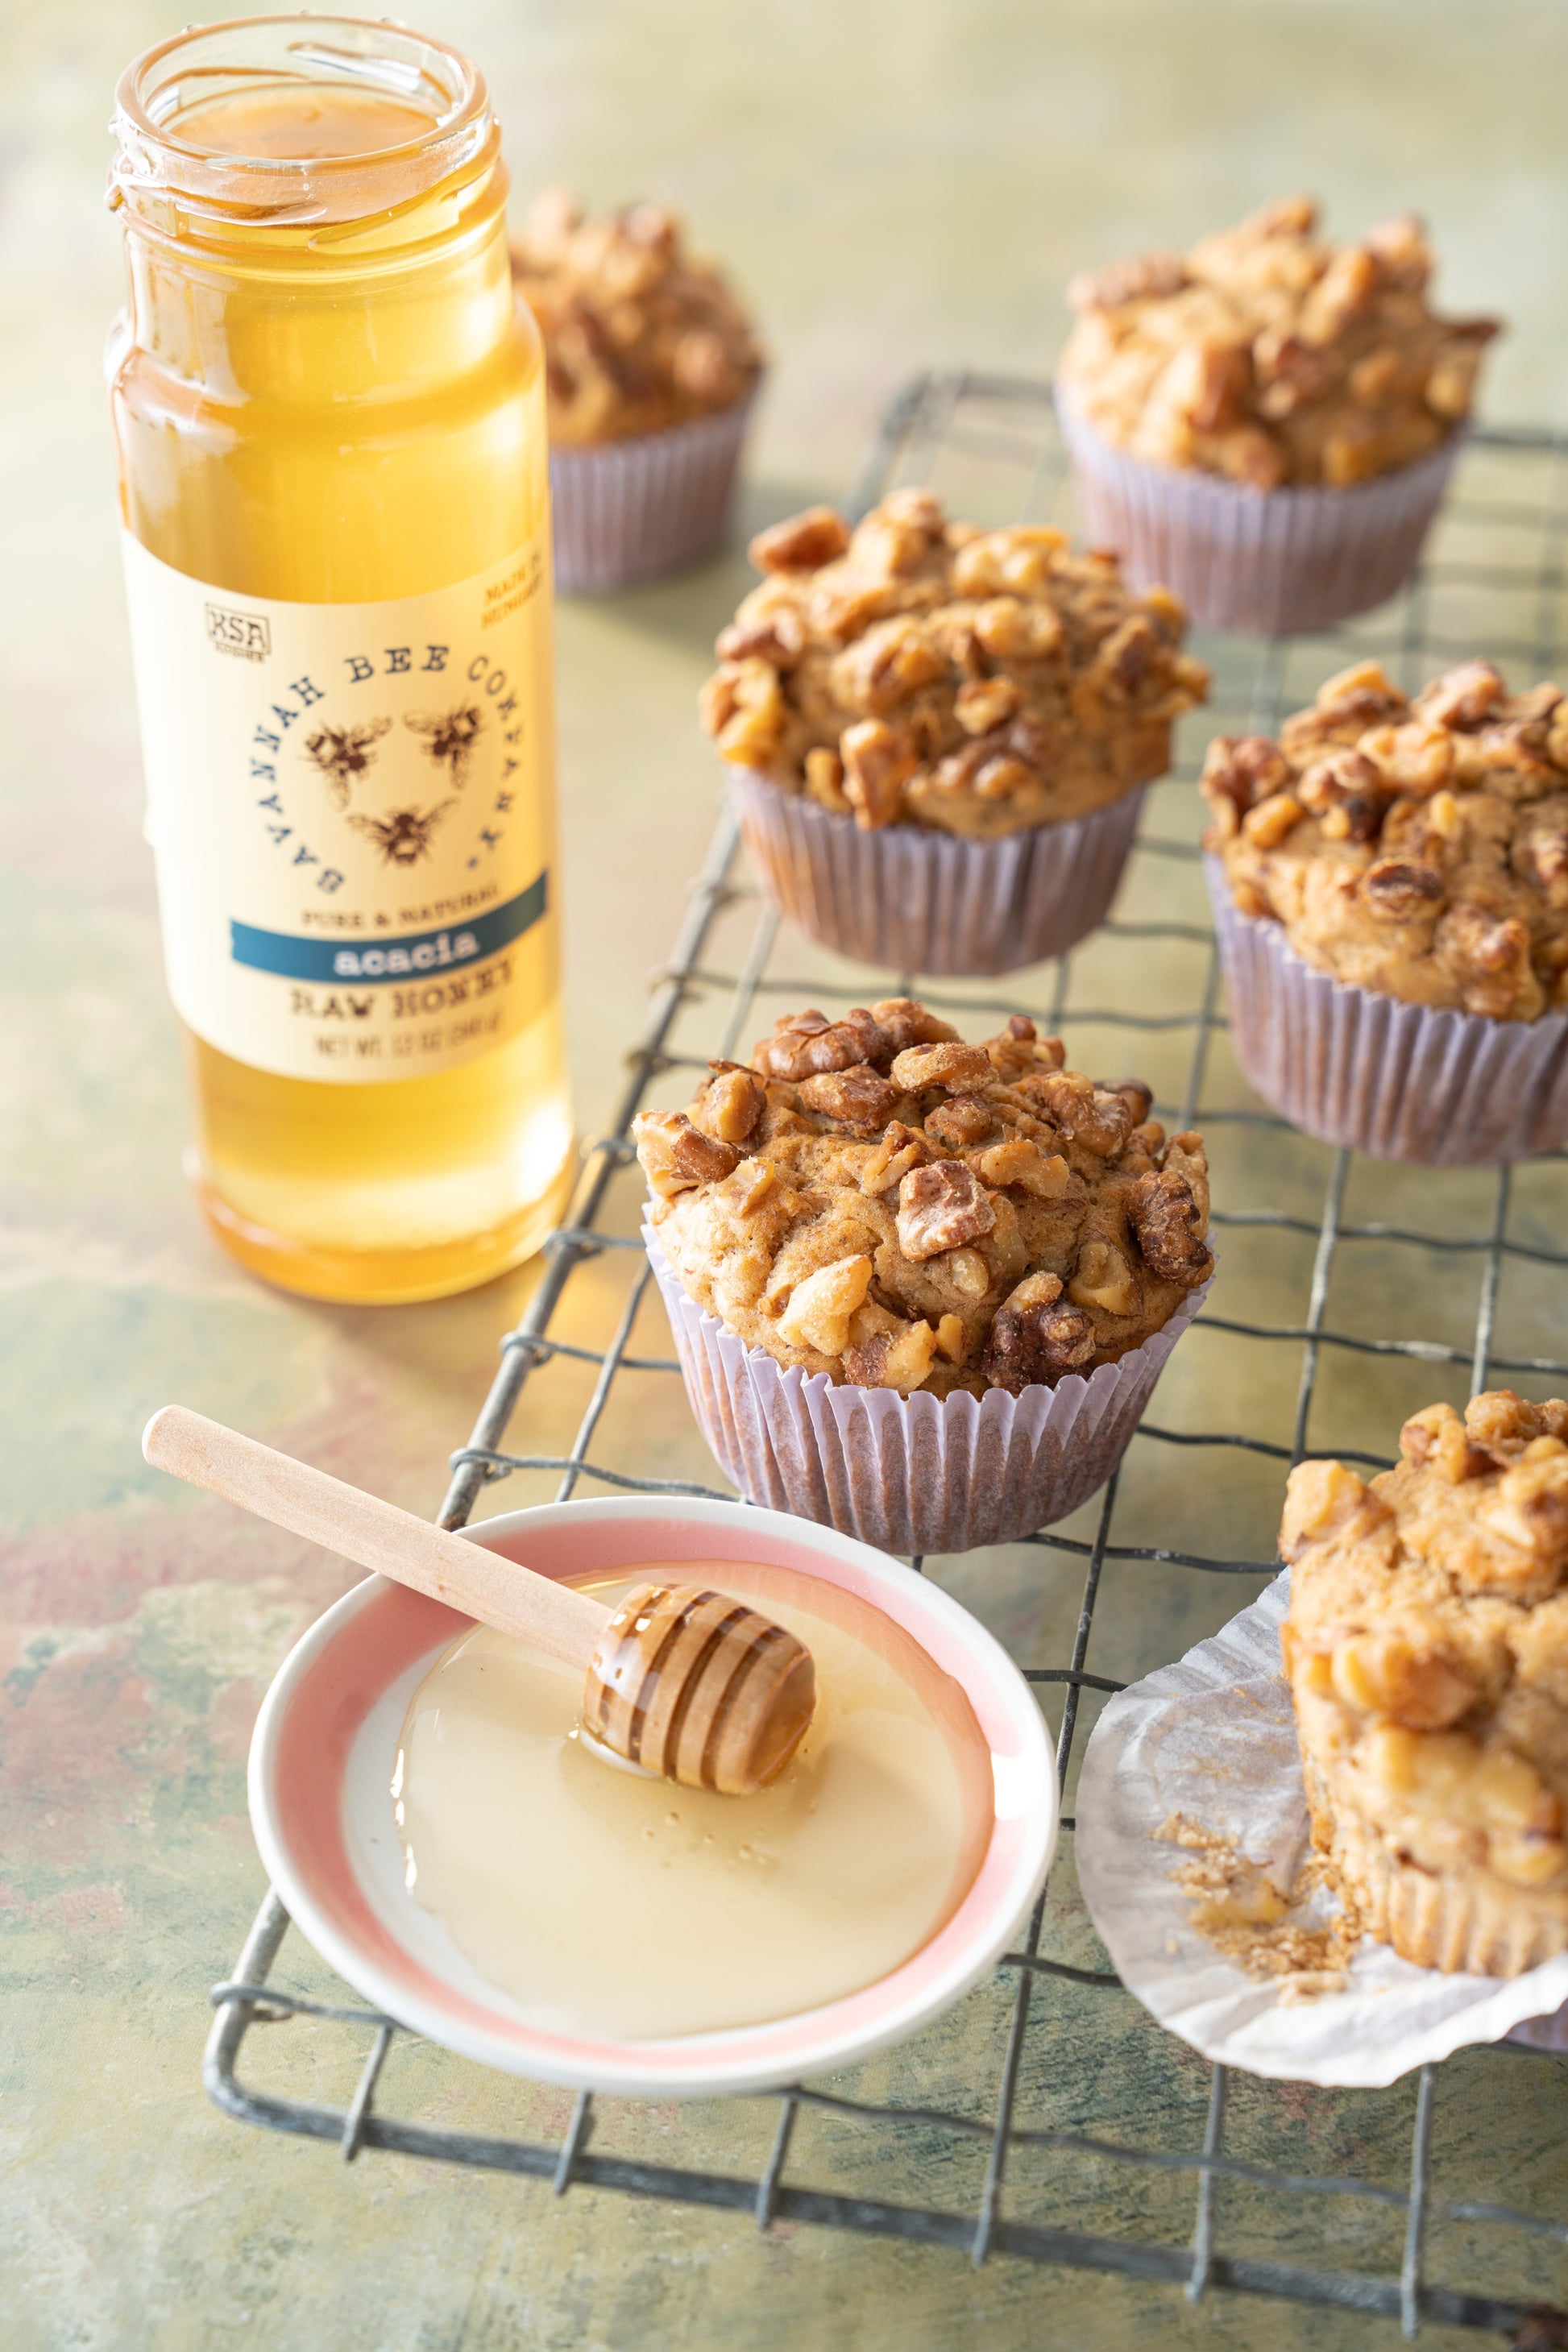 Banana spice muffins on an oven rack with an open jar of 12 ounce acacia honey.